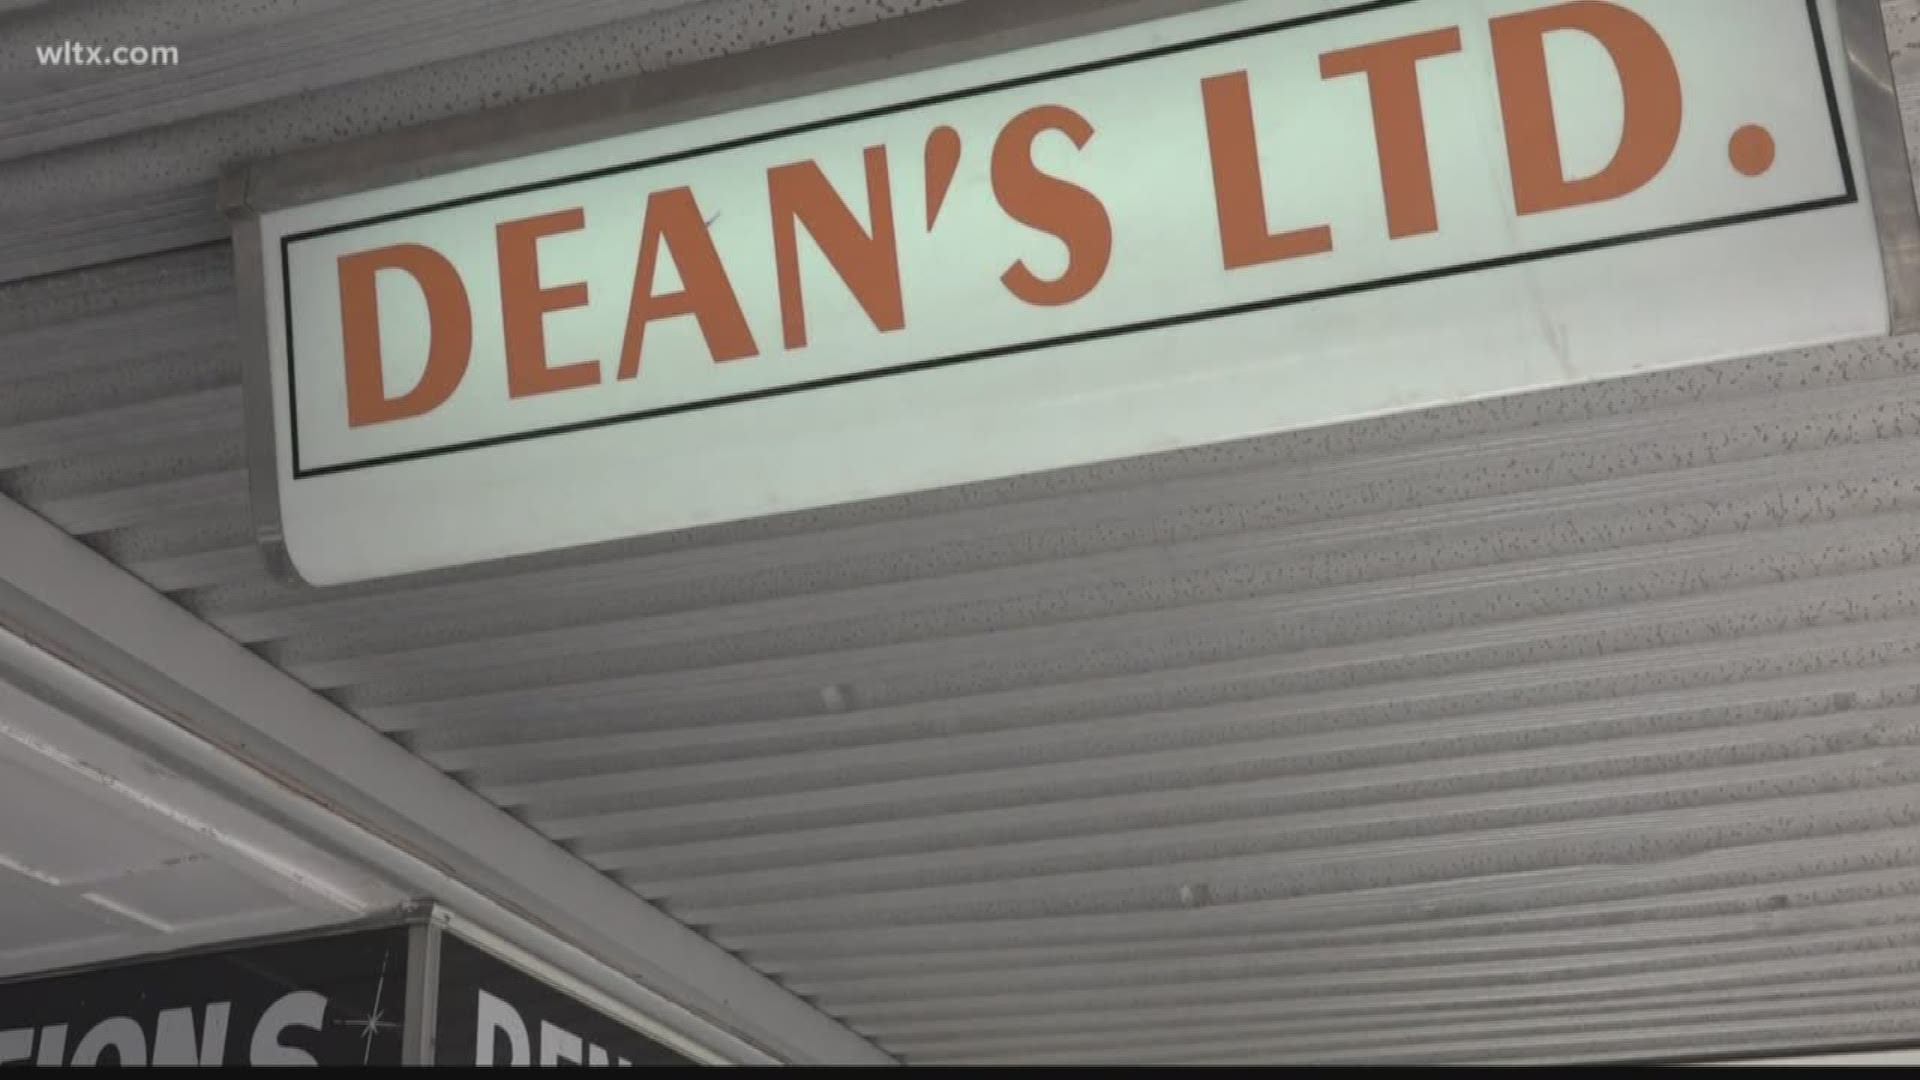 A long-time business in Orangeburg plans to close after decades.